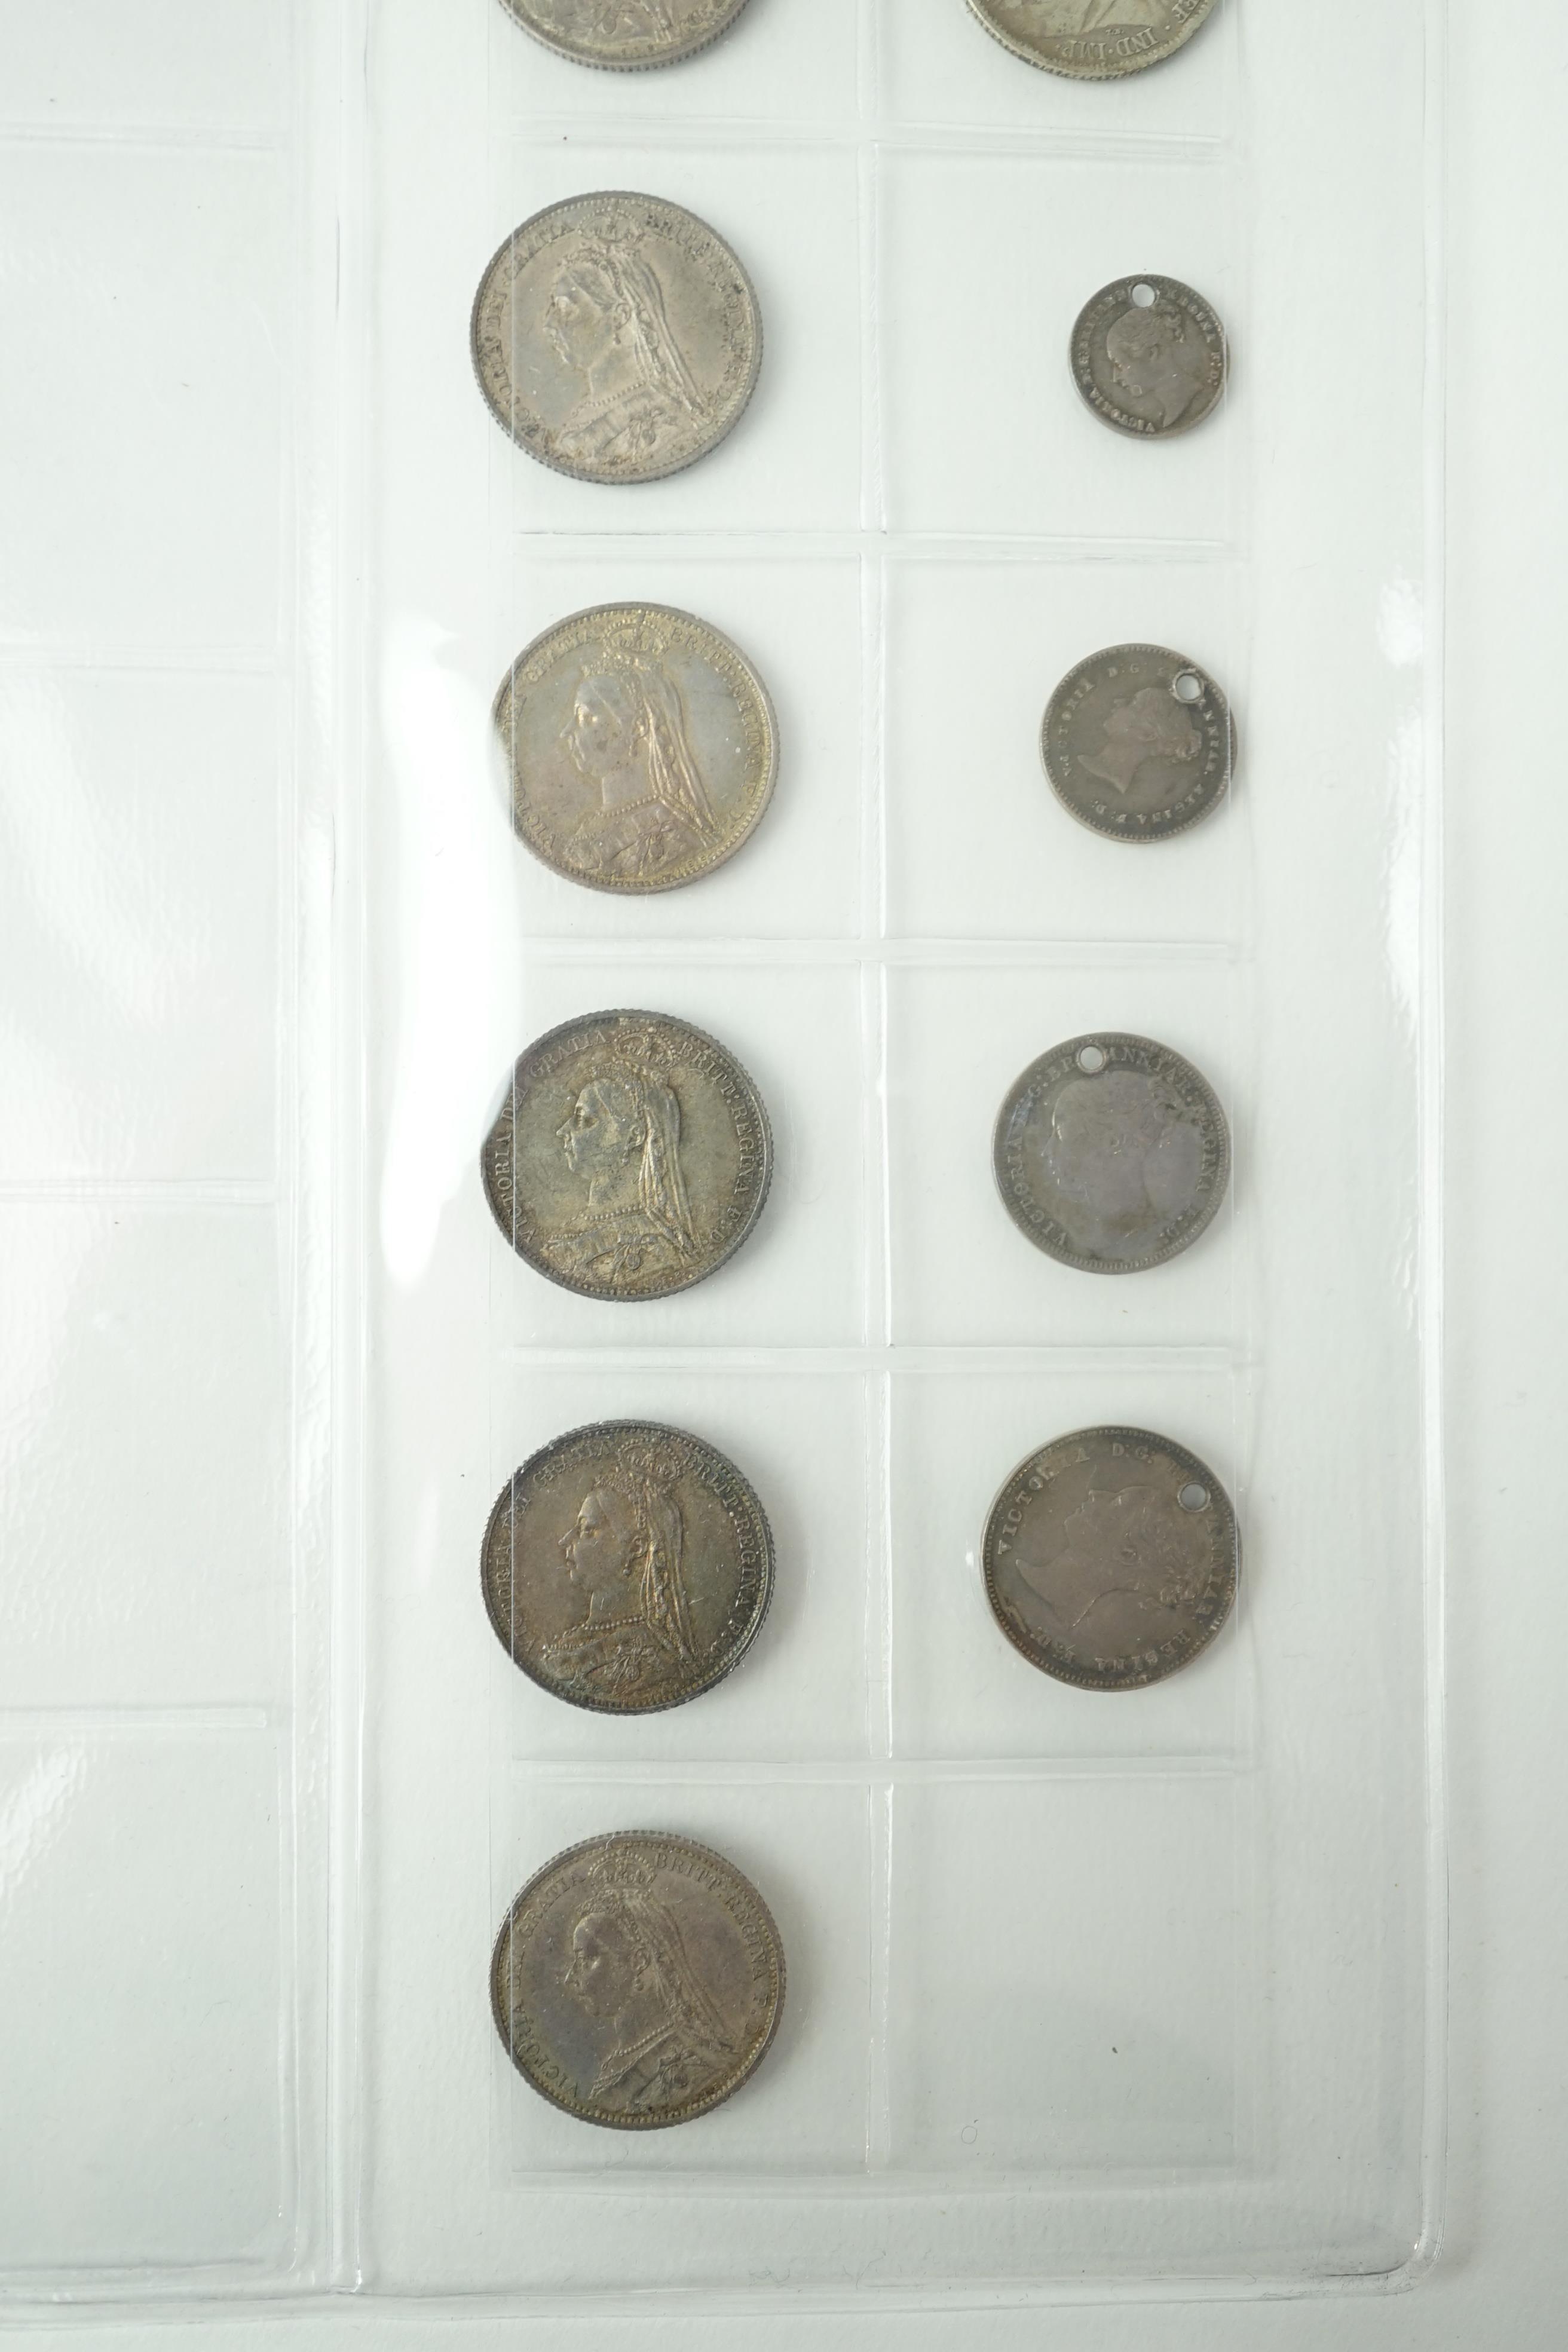 British coins, Victoria (1837-1901), halfcrown to halfpenny and various odd silver maundy 1d to 4d